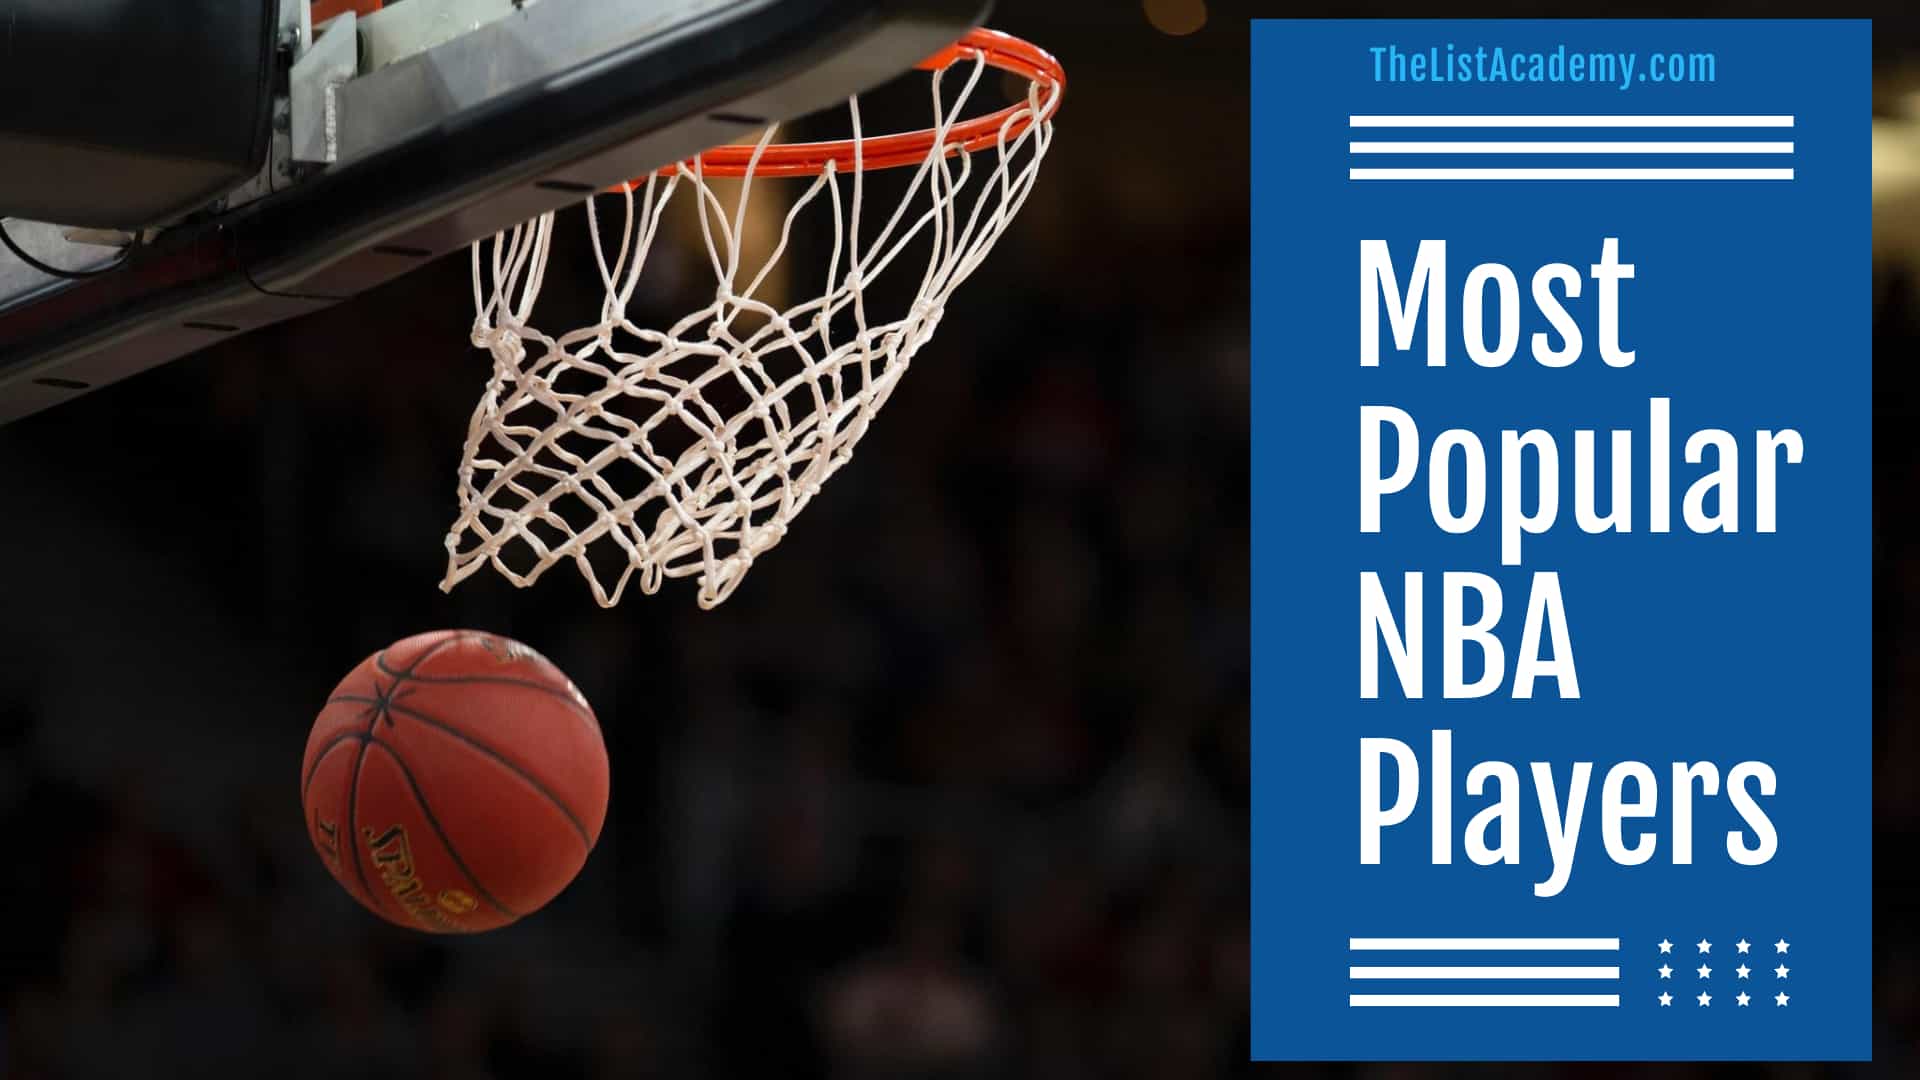 Cover Image For List : 108 Most Popular Nba Players